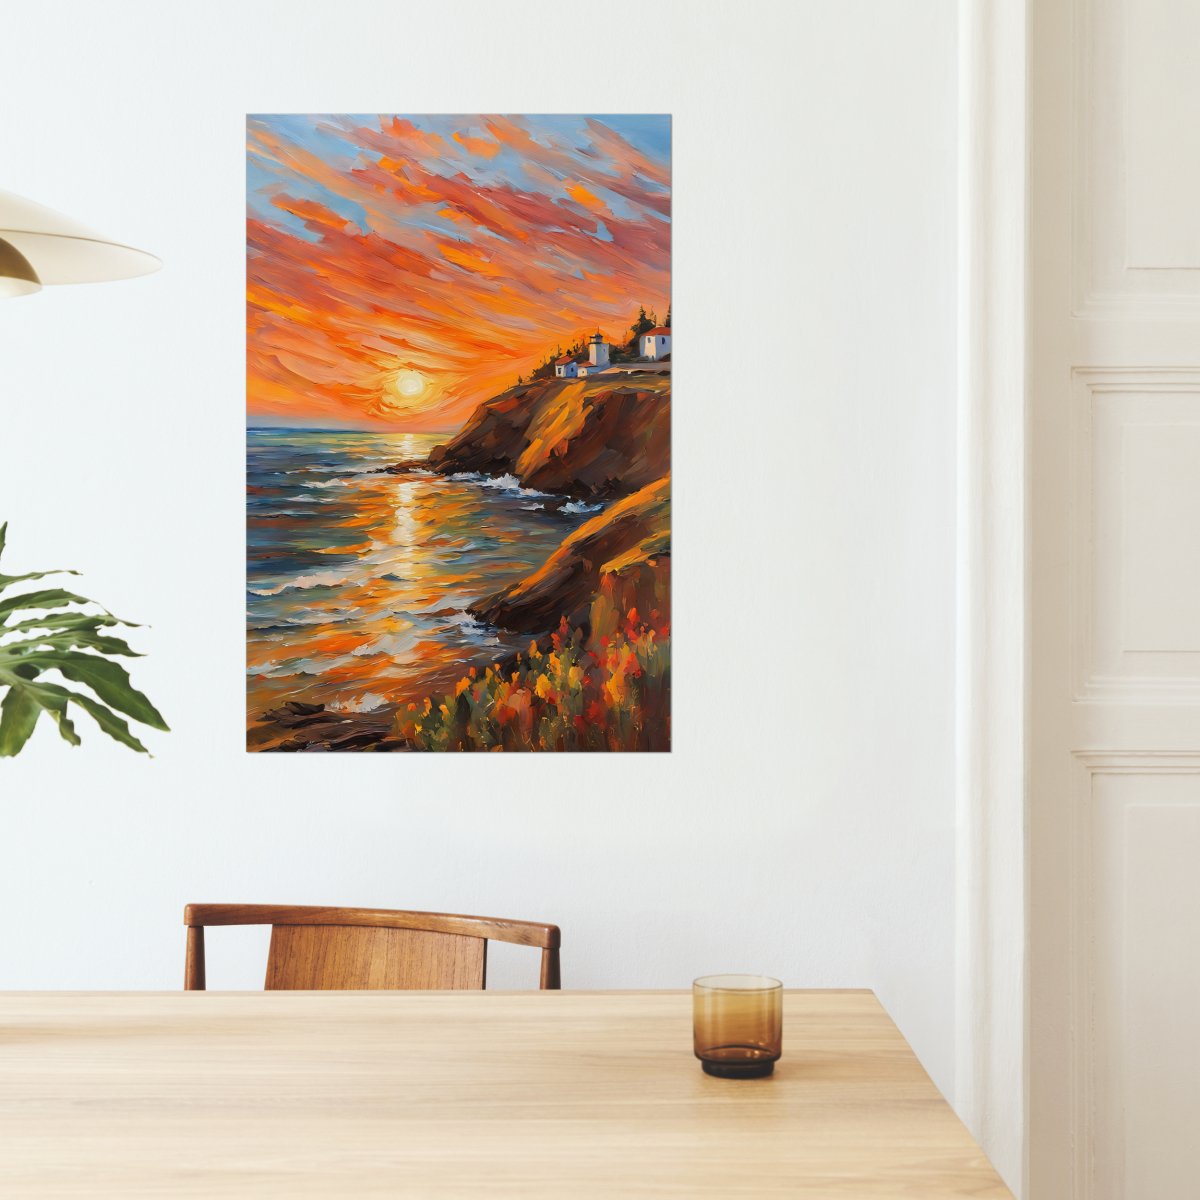 Cliffside town - Art print - Poster - Ever colorful